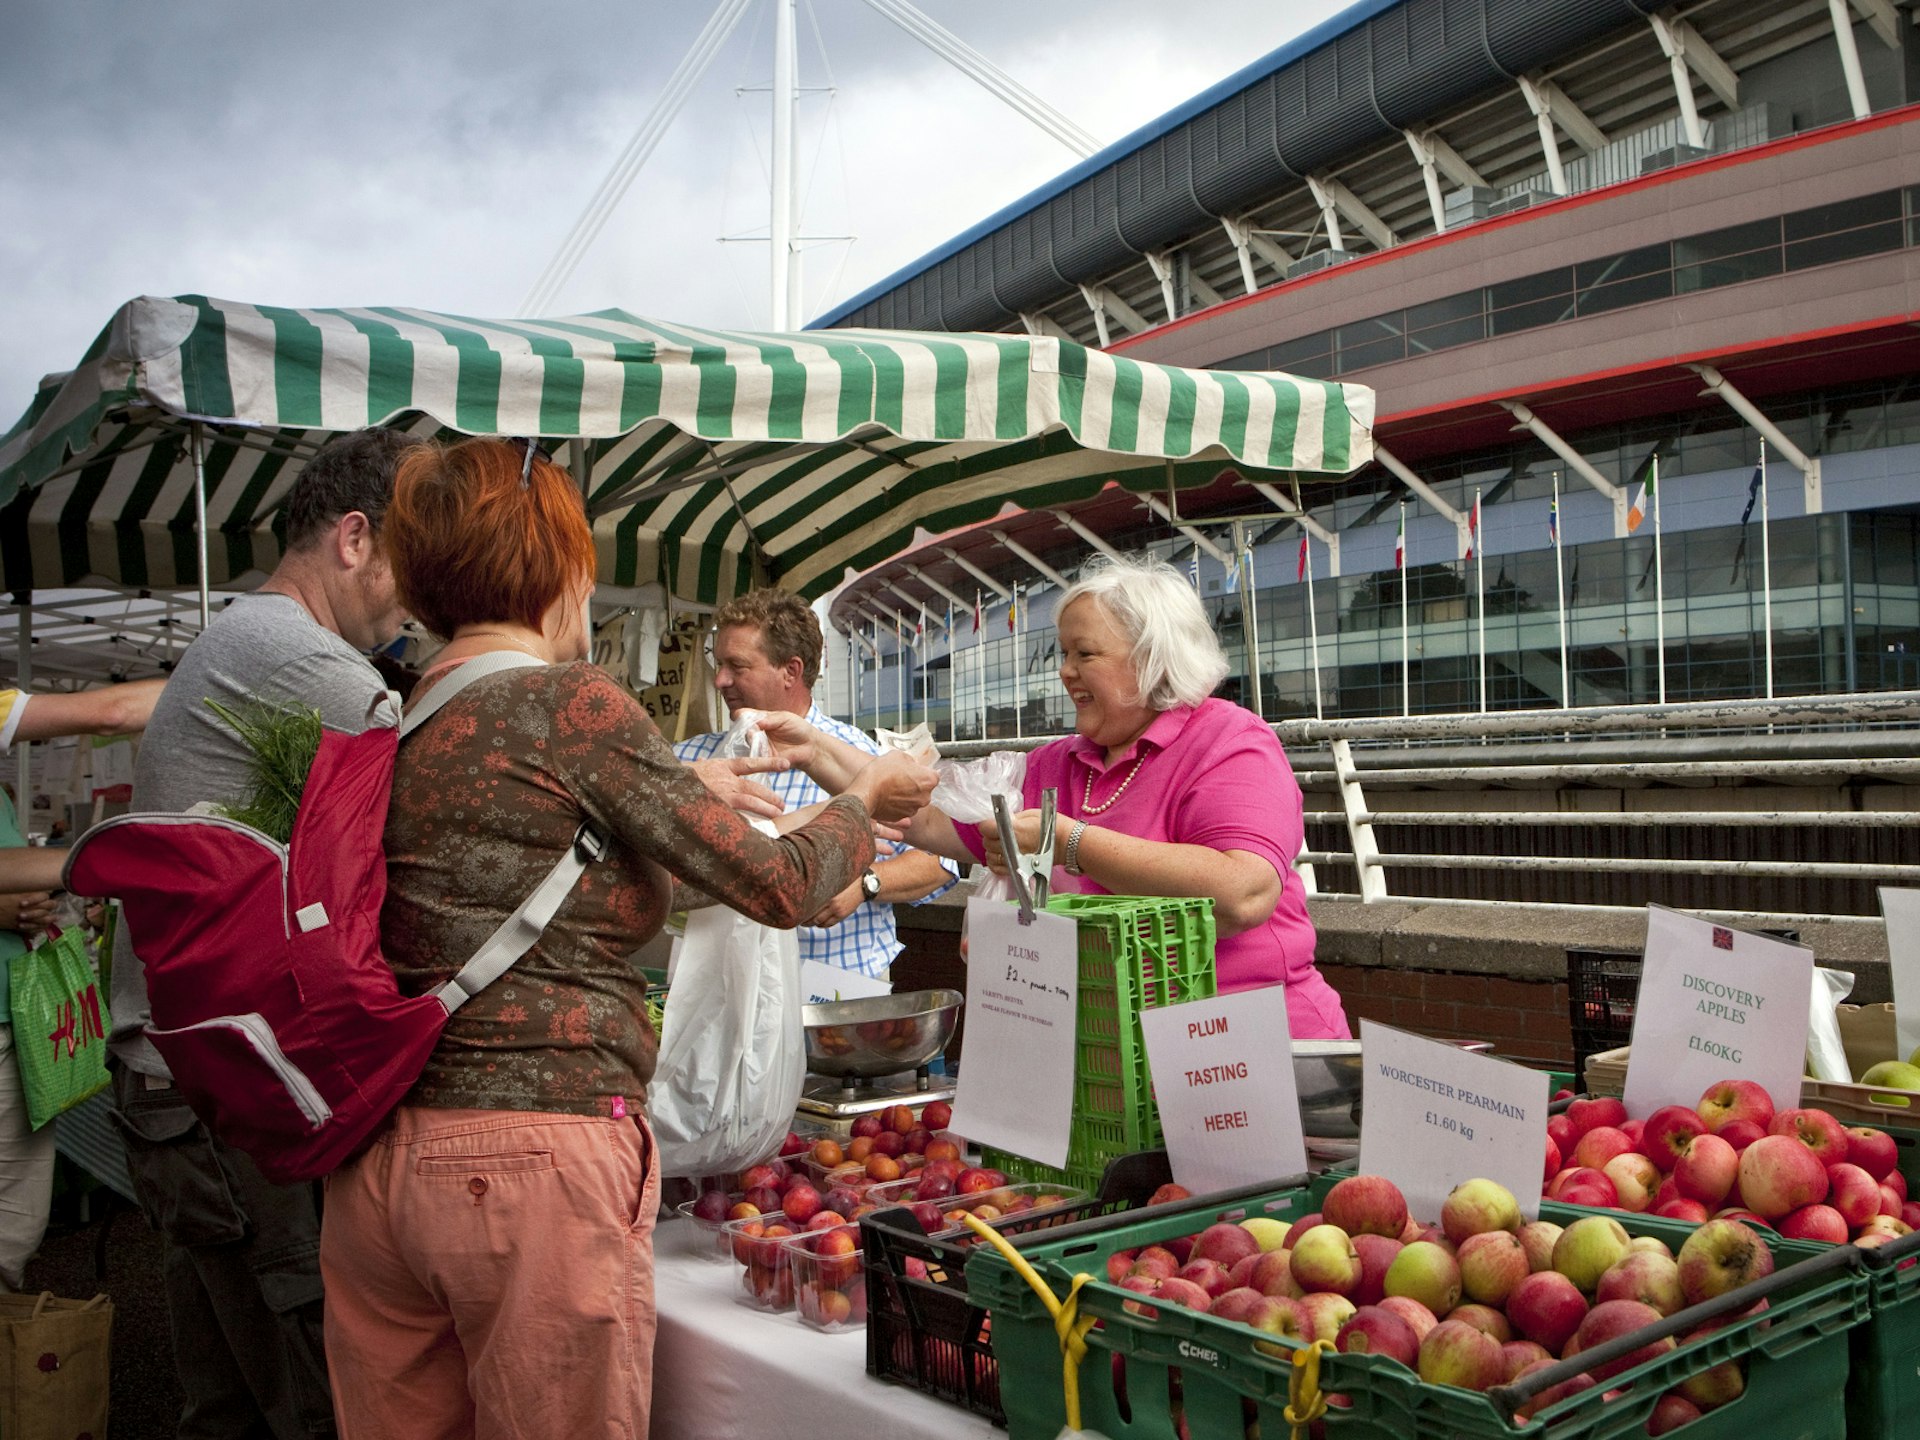 People buying produce from a grocery stand at the Riverside Market, Cardiff © Huw Jones / Getty Images